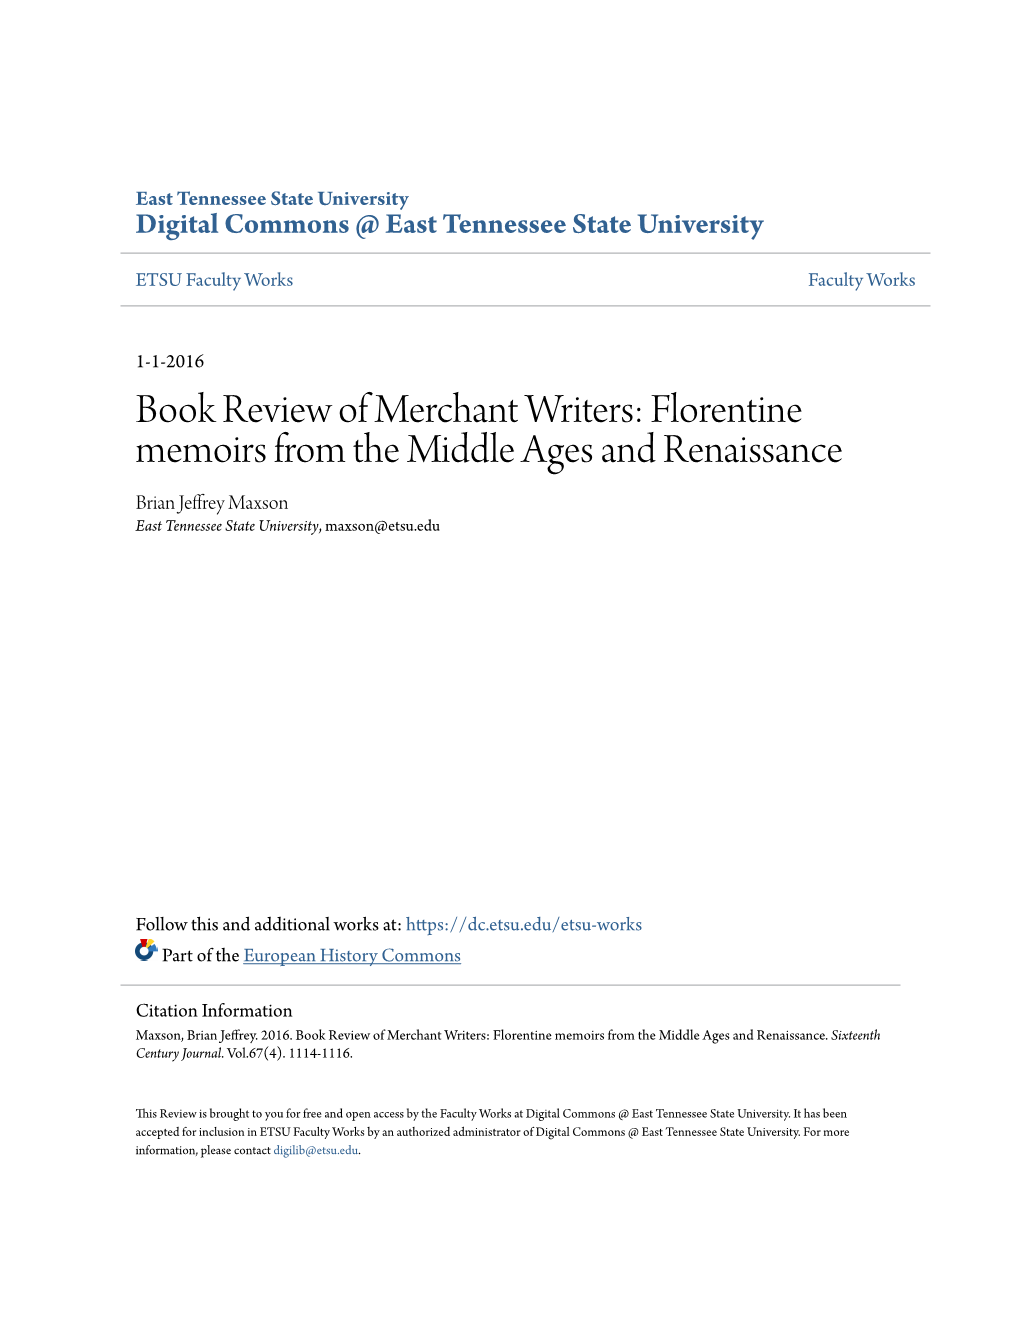 Book Review of Merchant Writers: Florentine Memoirs from the Middle Ages and Renaissance Brian Jeffrey Maxson East Tennessee State University, Maxson@Etsu.Edu